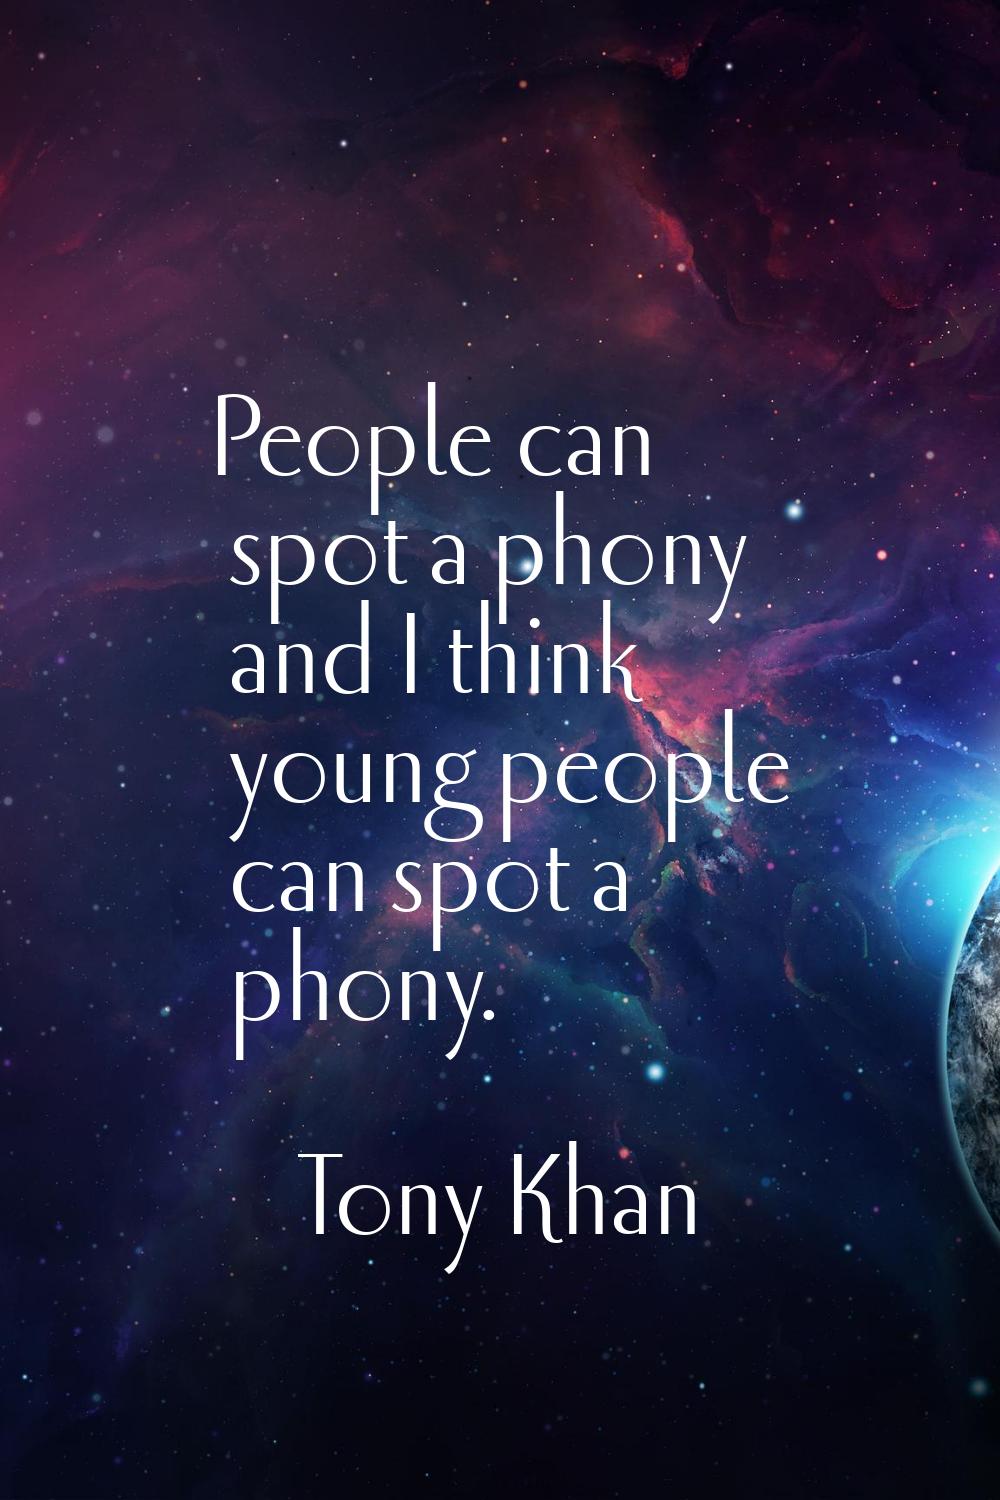 People can spot a phony and I think young people can spot a phony.